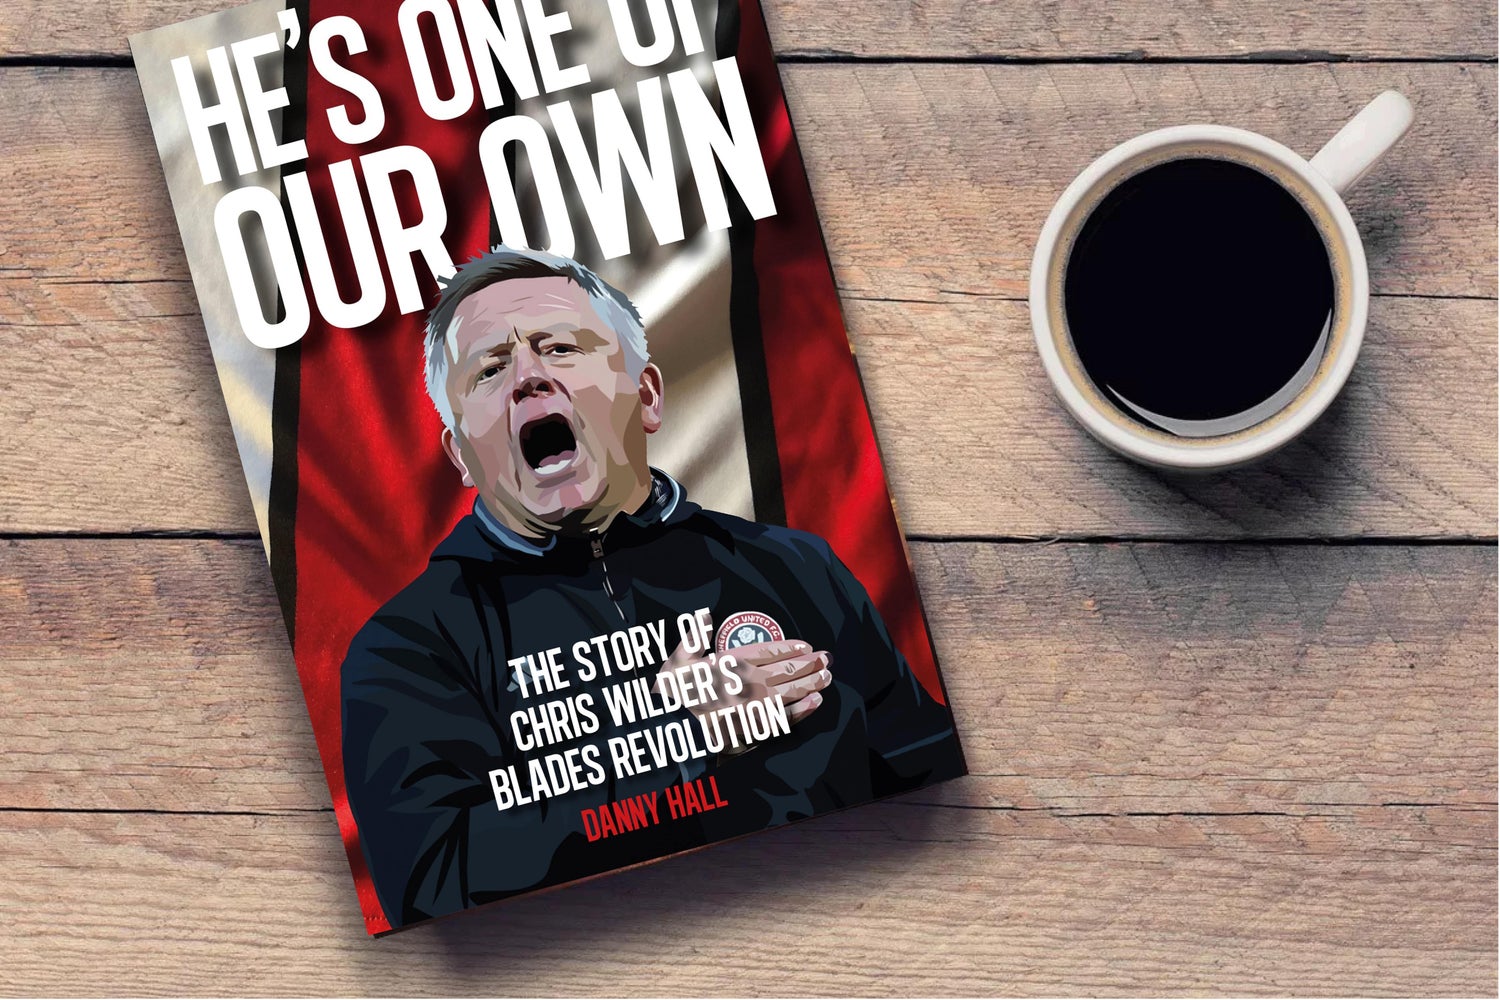 Image of 'He's one of our own - The story of Chris Wilder's Blades revolution' (paperback) by Danny Hall